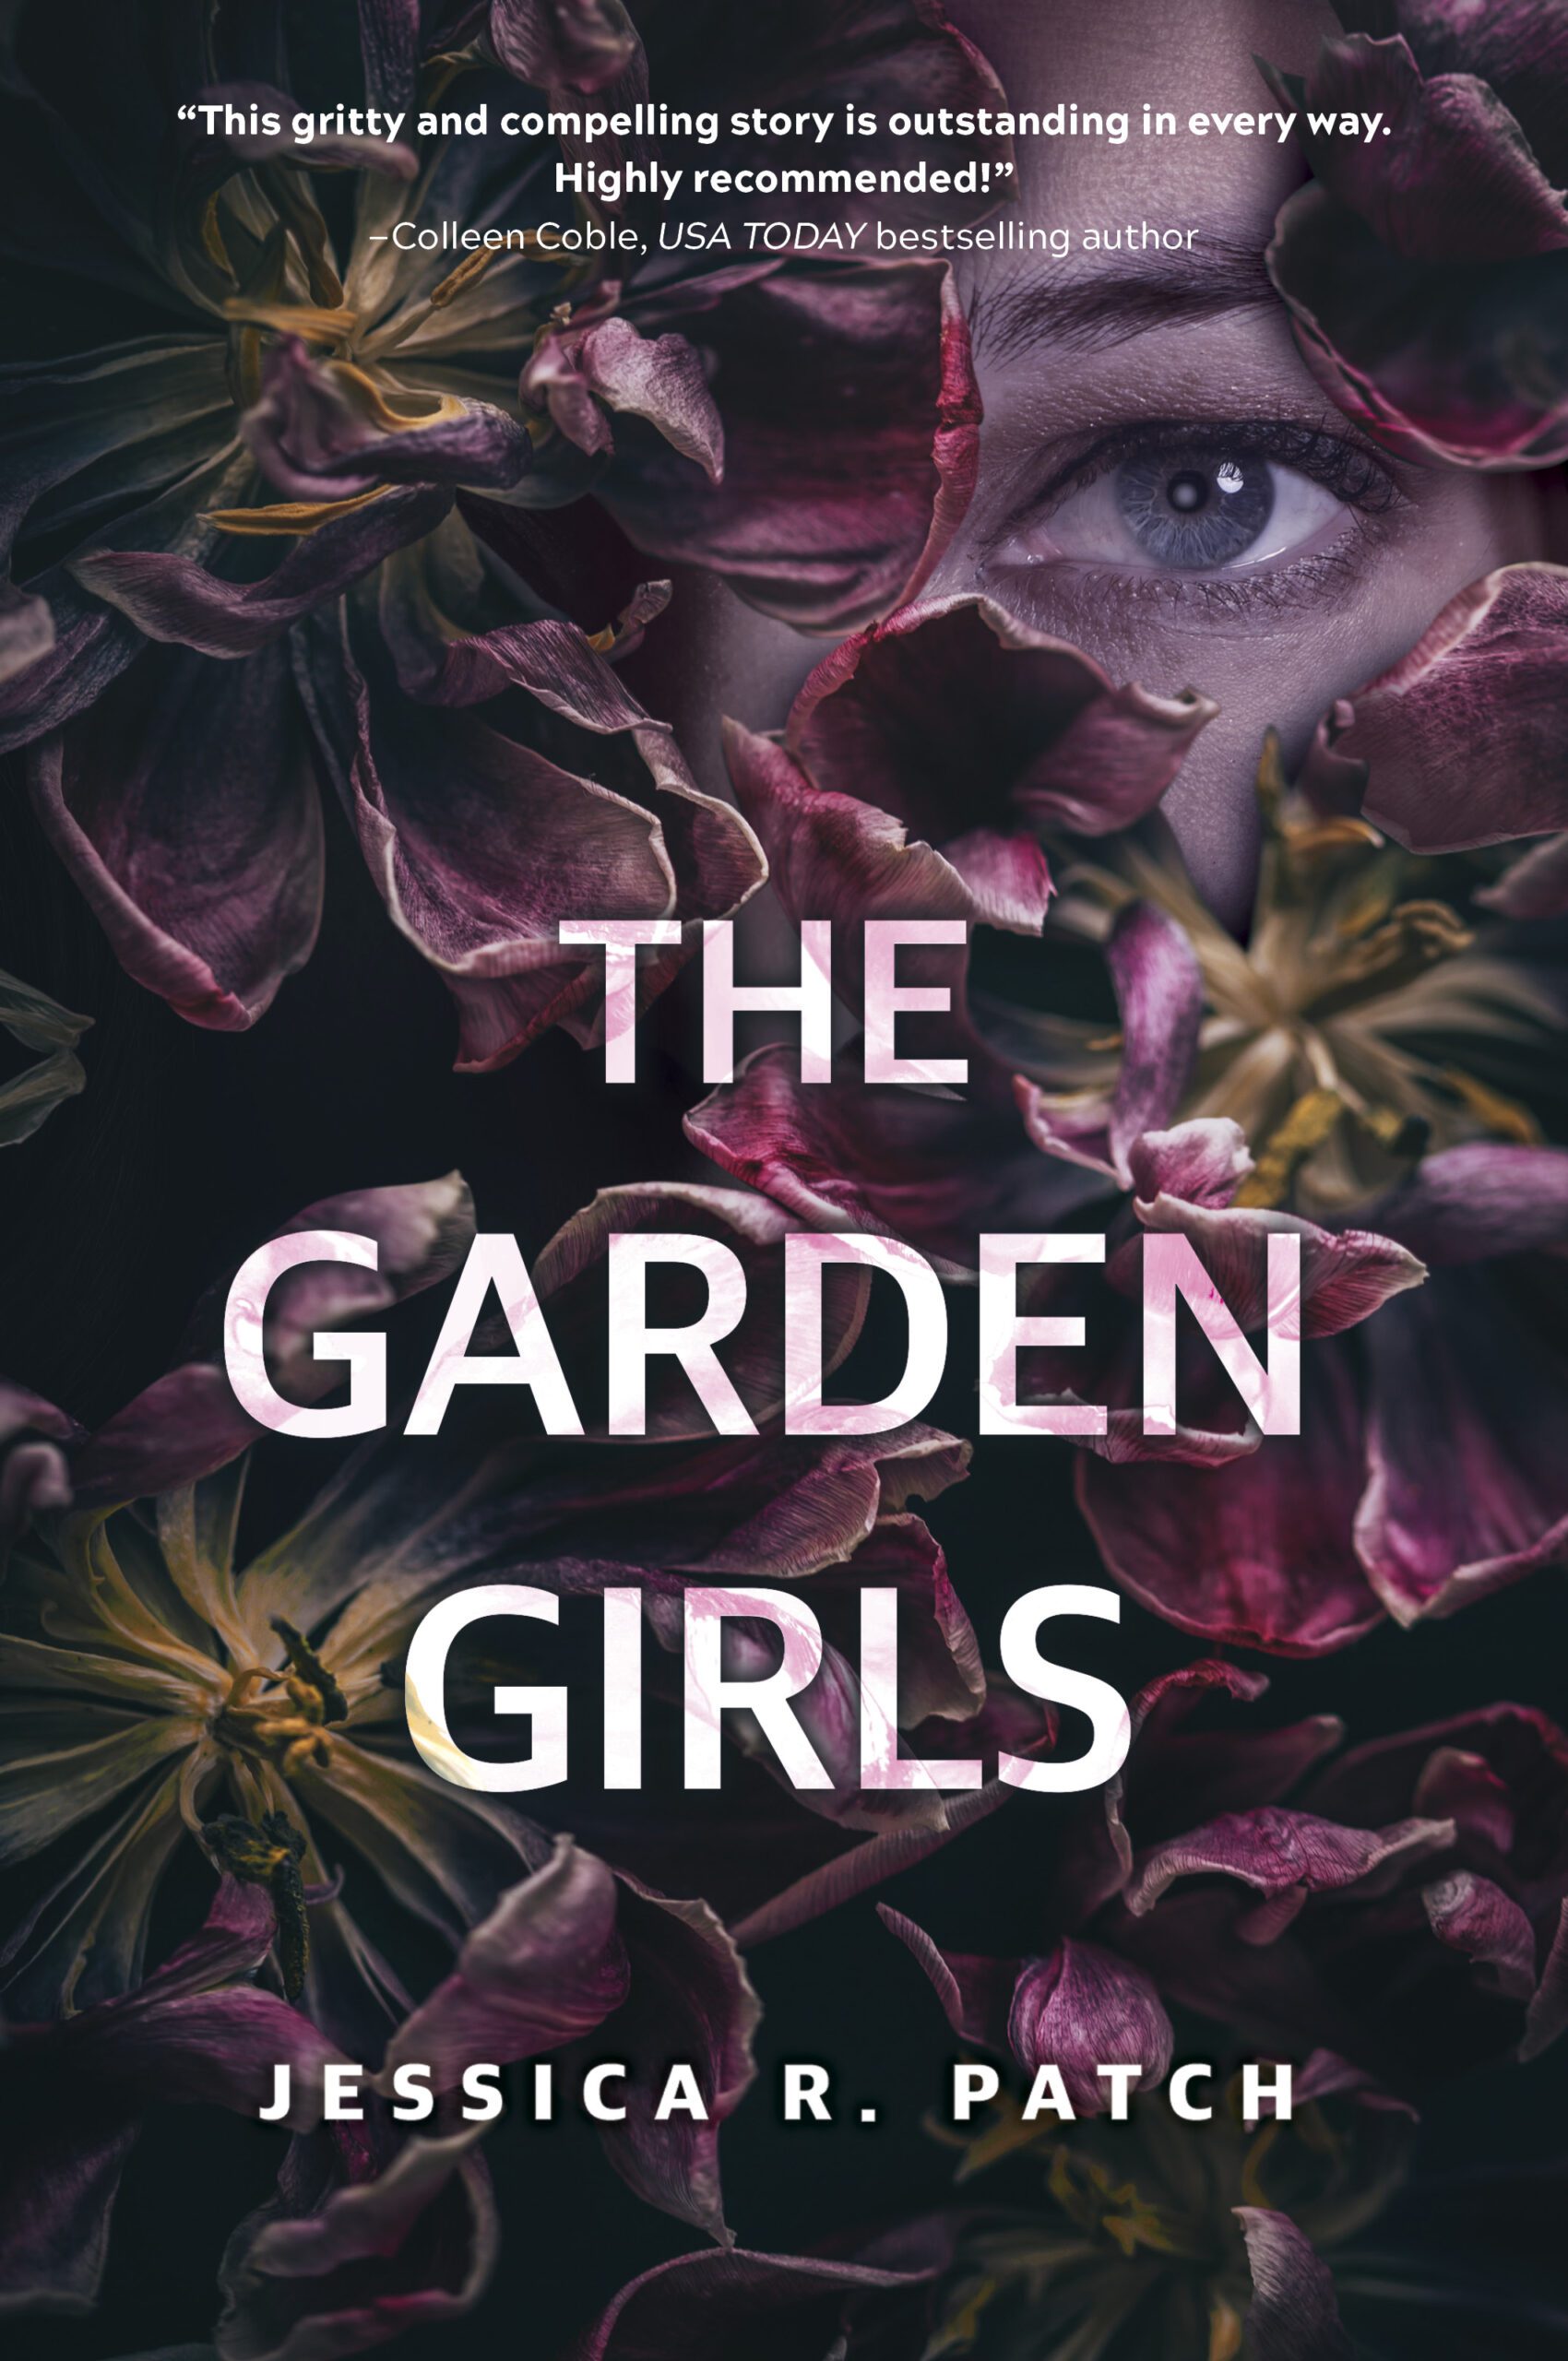 The Garden Girls by Jessica R. Patch